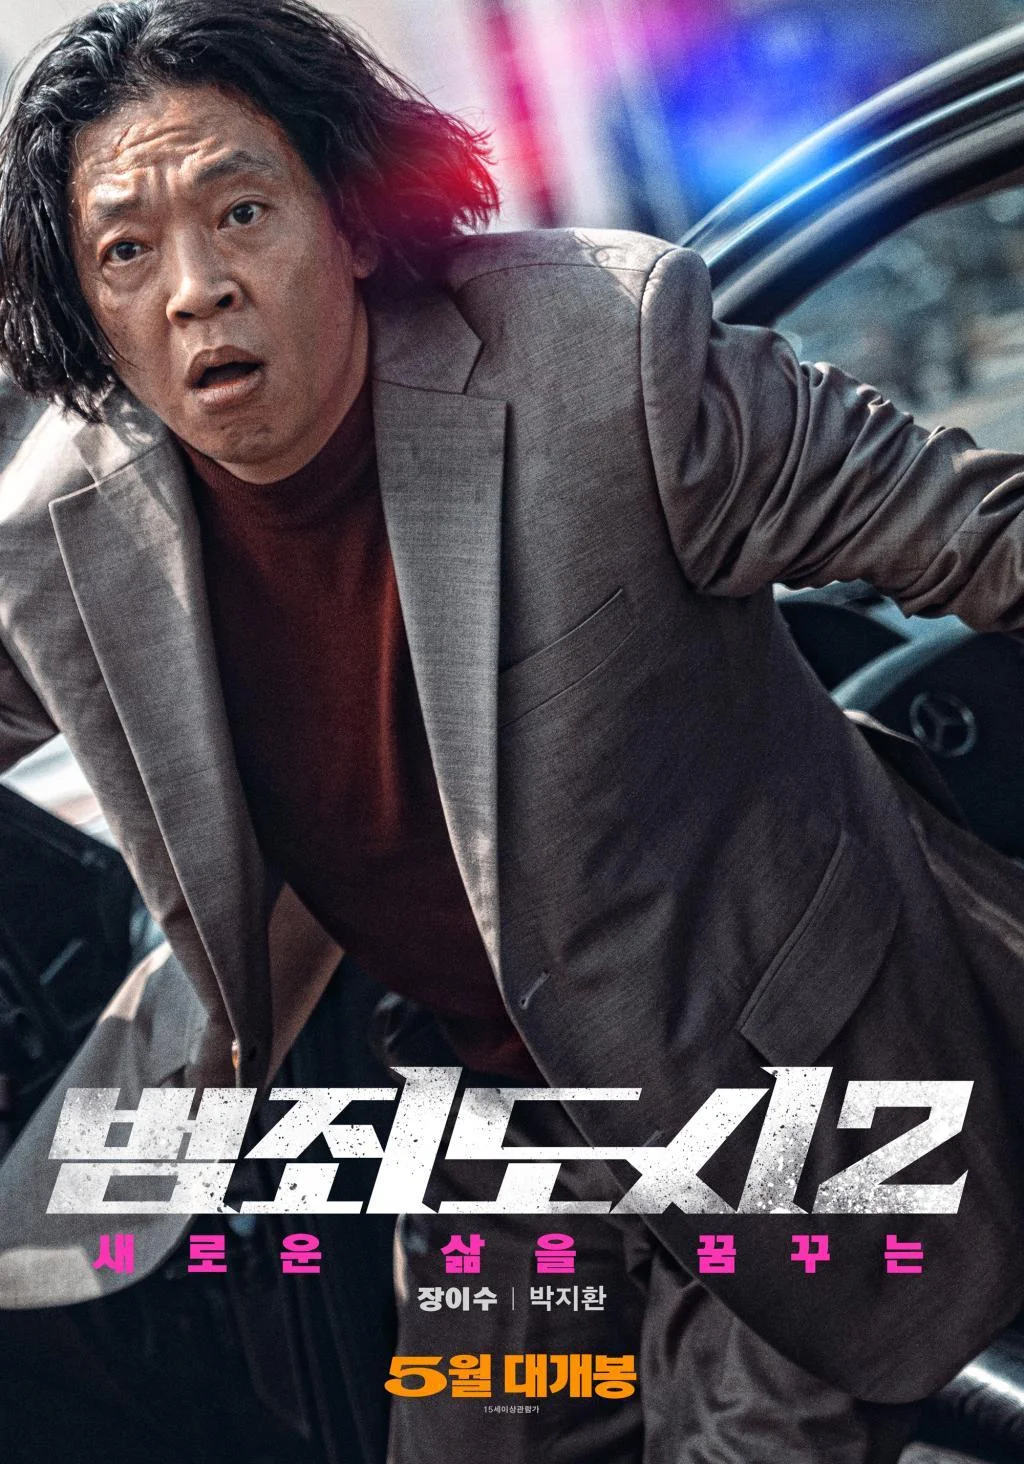 the-roundup-releases-character-posters-and-reveals-new-trailers-4